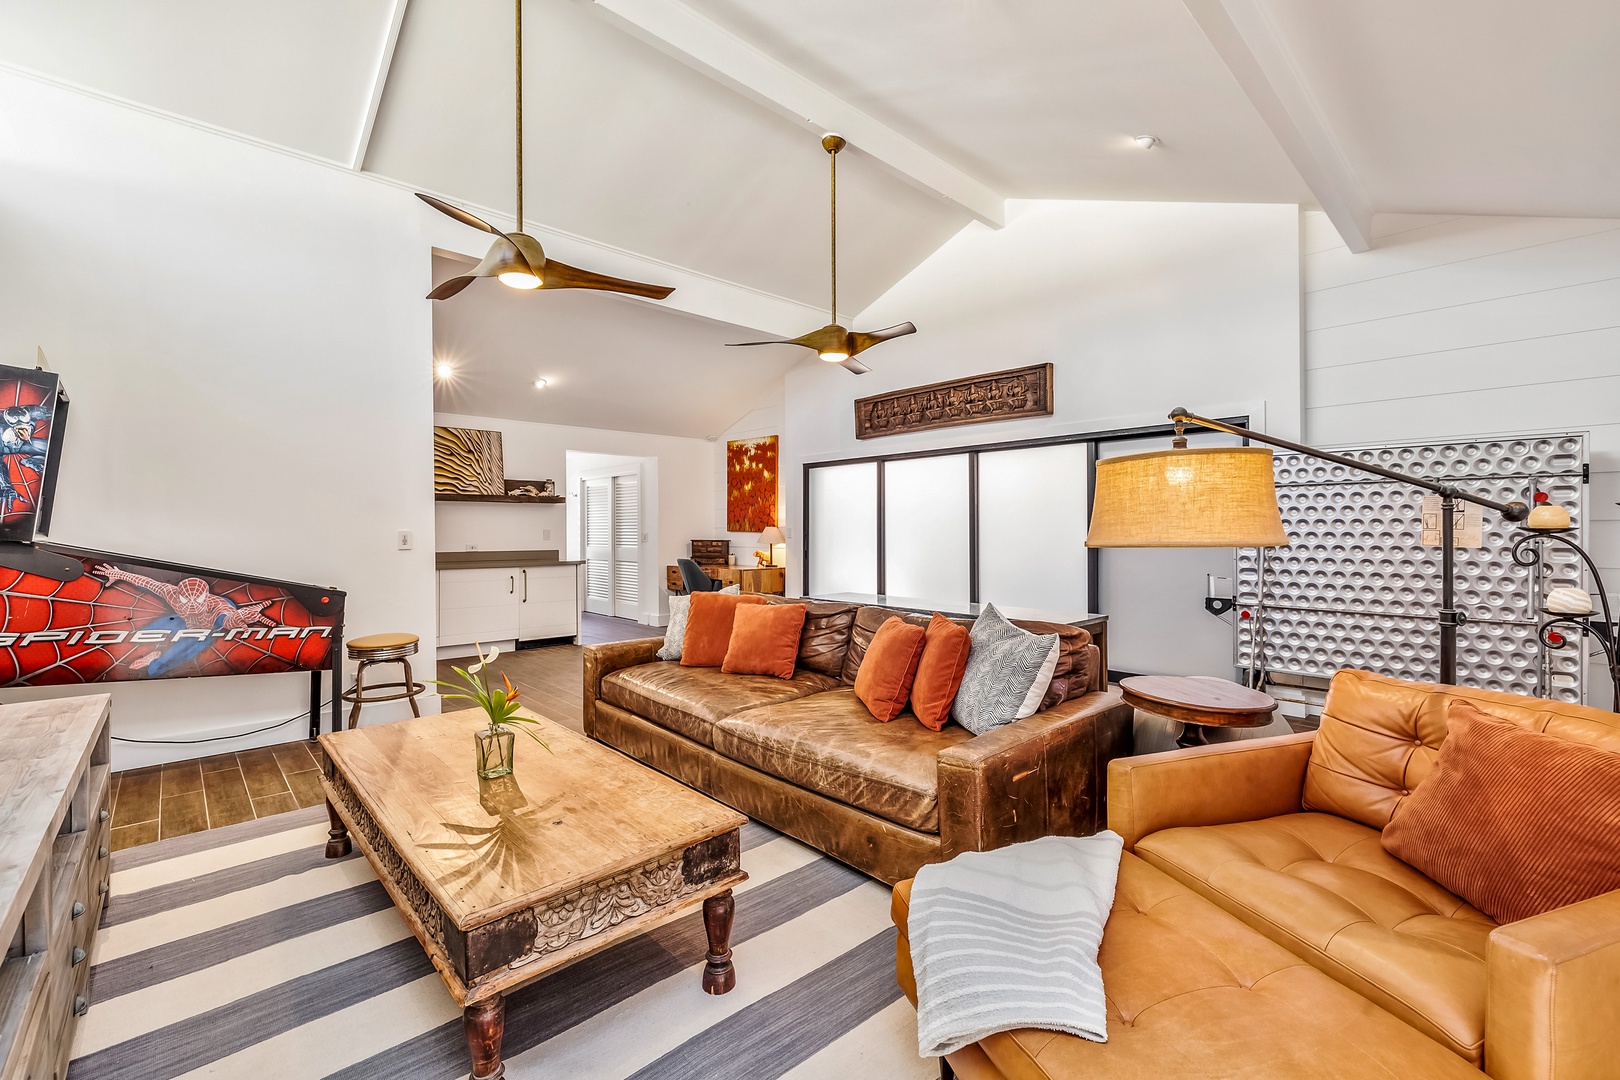 Kailua Vacation Rentals, Hale Ohana - The living area opens up to the bar and workspace